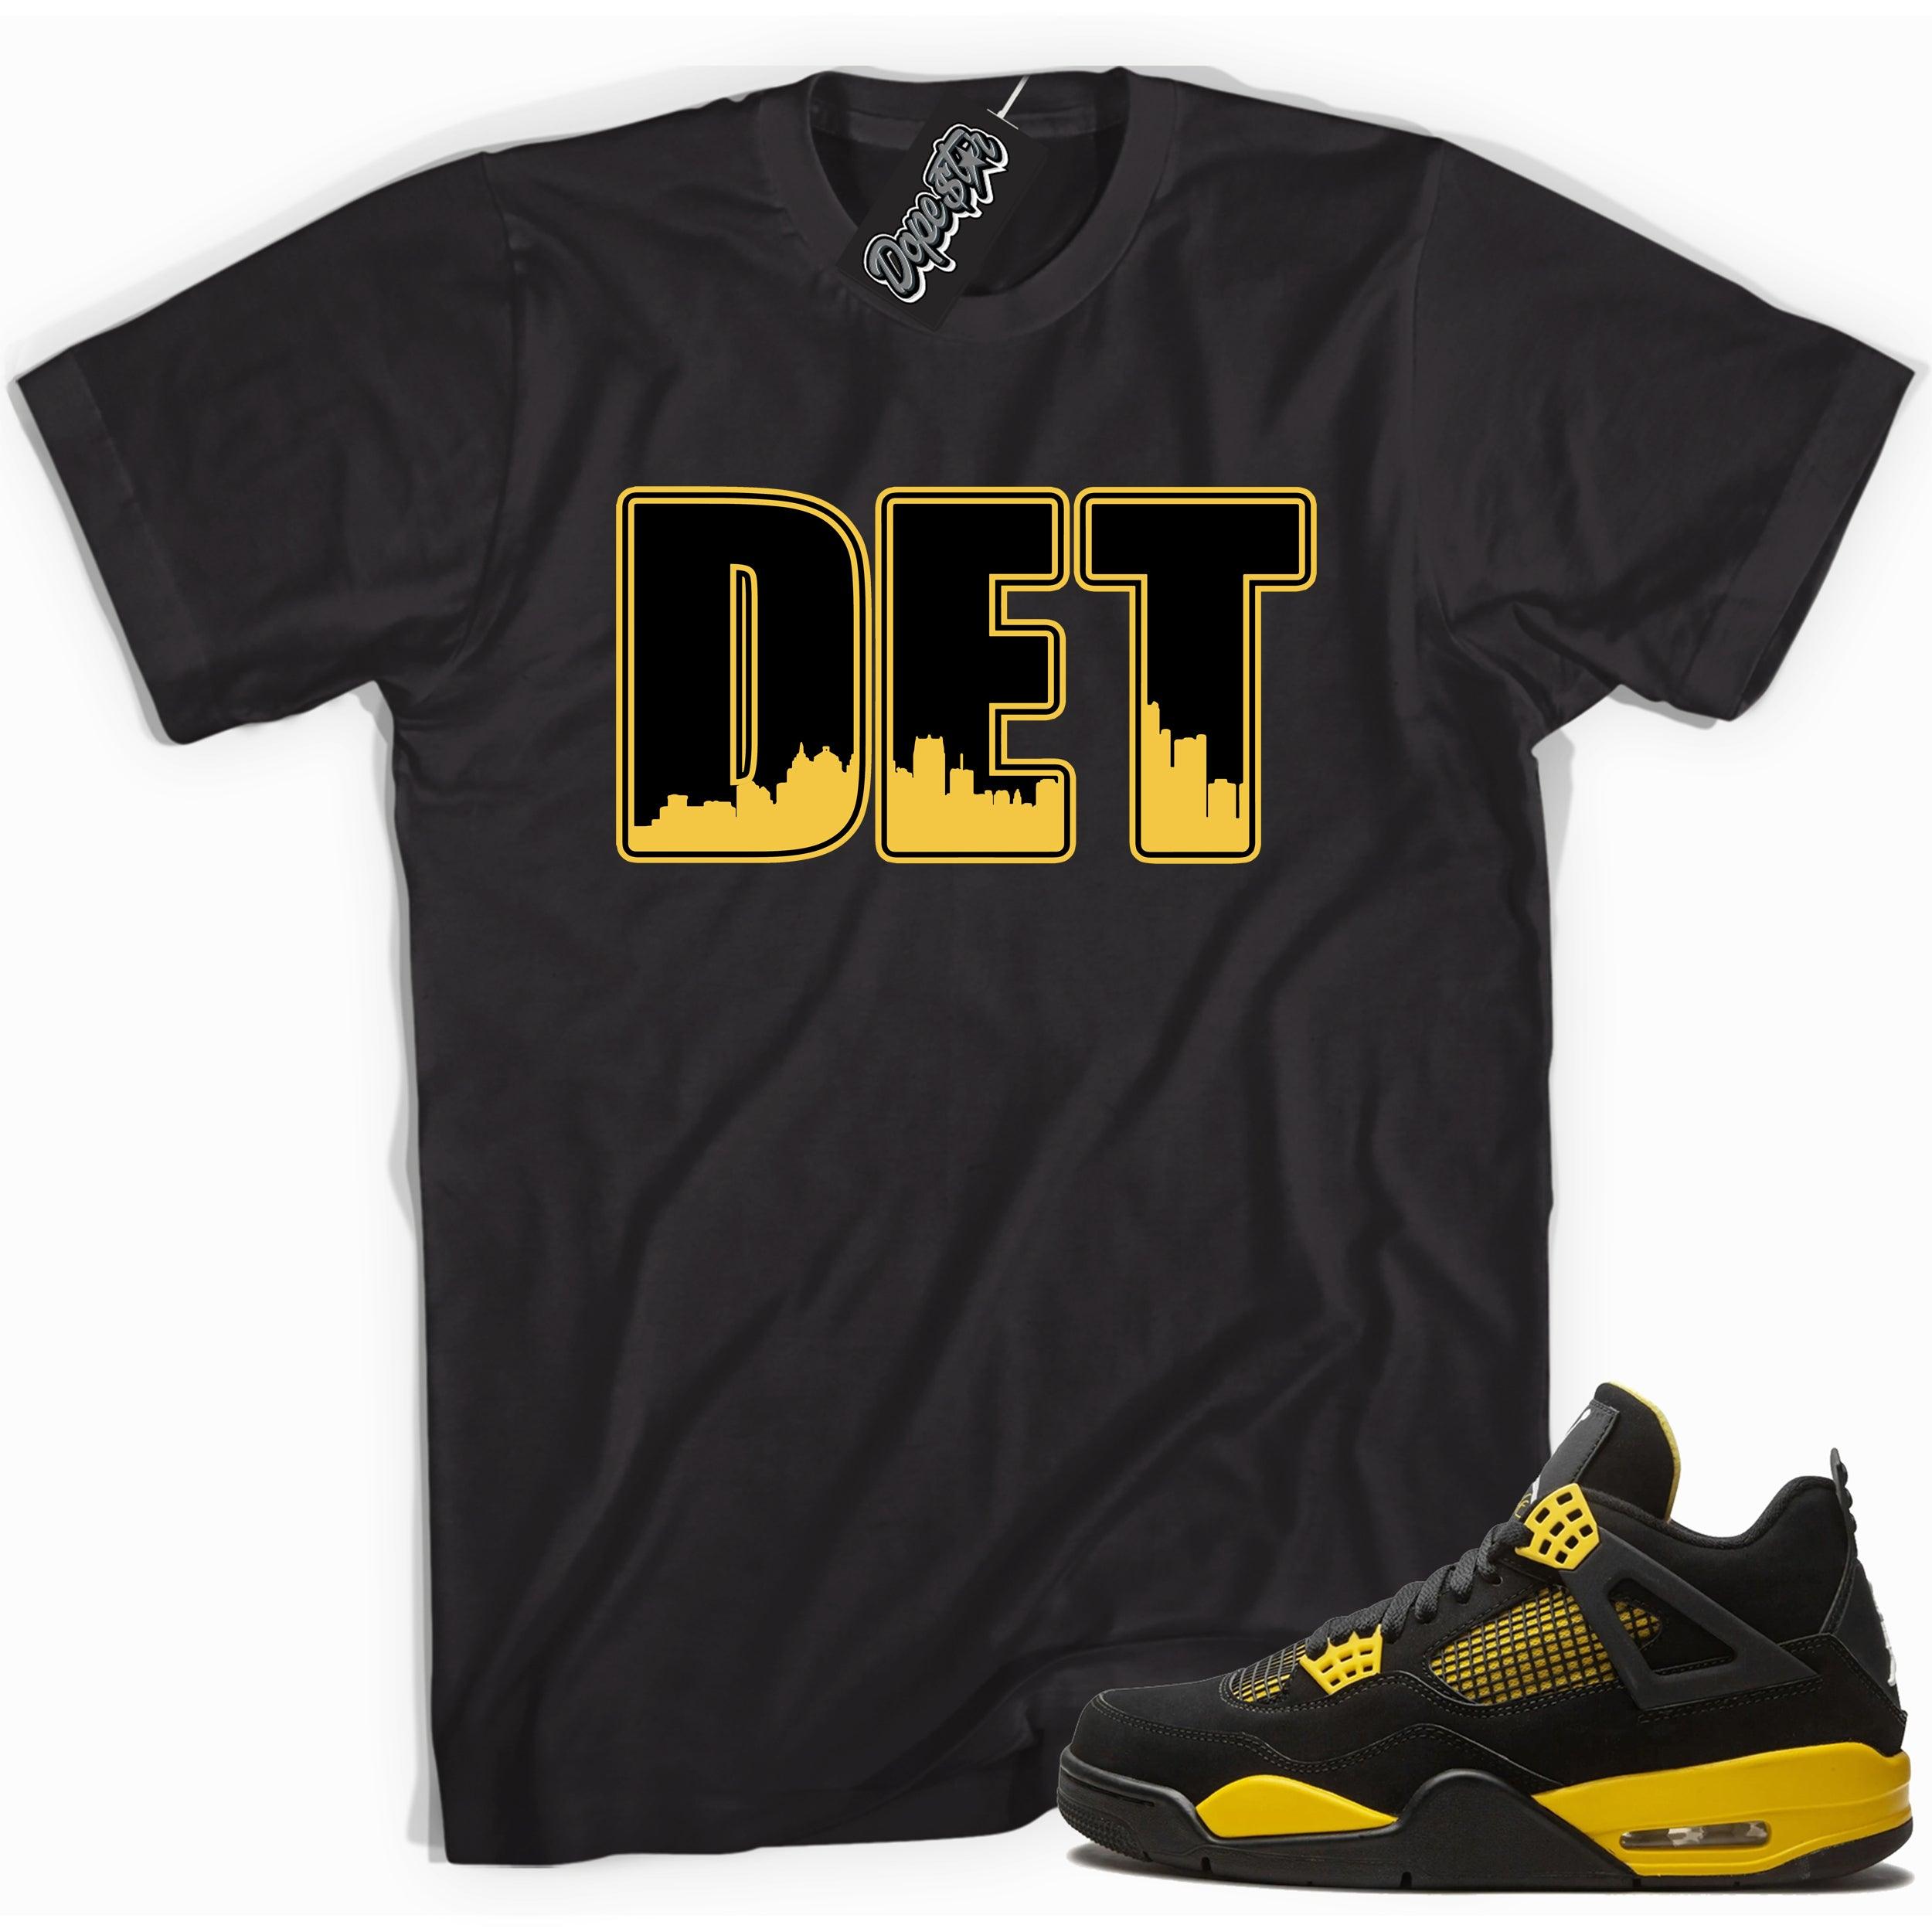 Cool black graphic tee with 'DETROIT' print, that perfectly matches  Air Jordan 4 Thunder sneakers